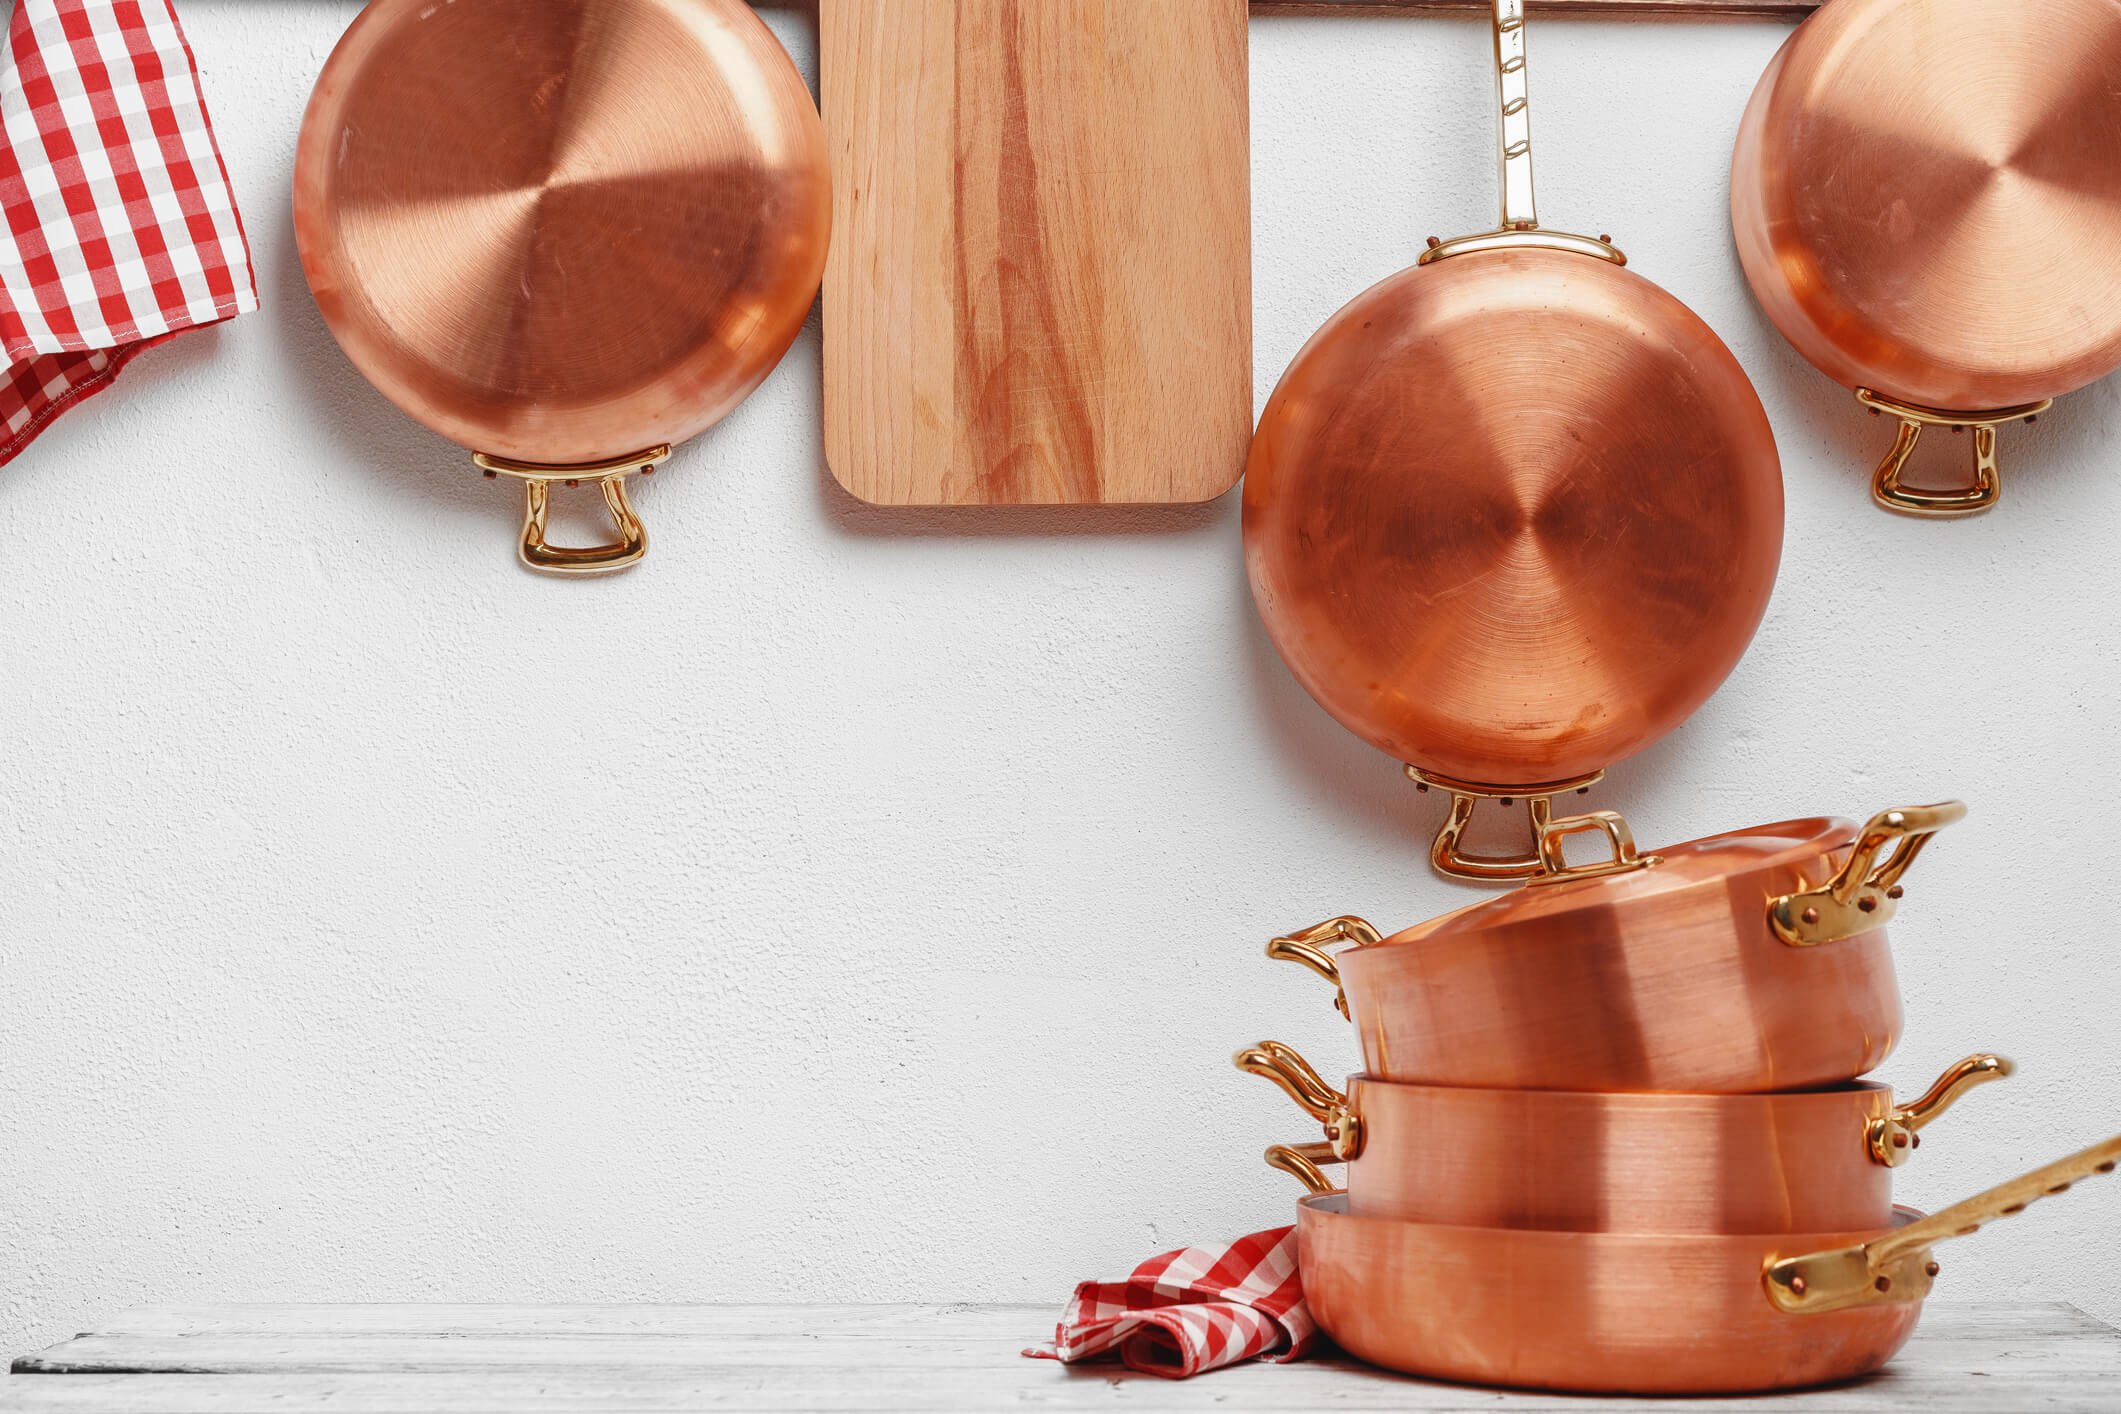 Copper Core Cookware for Better Heat Control